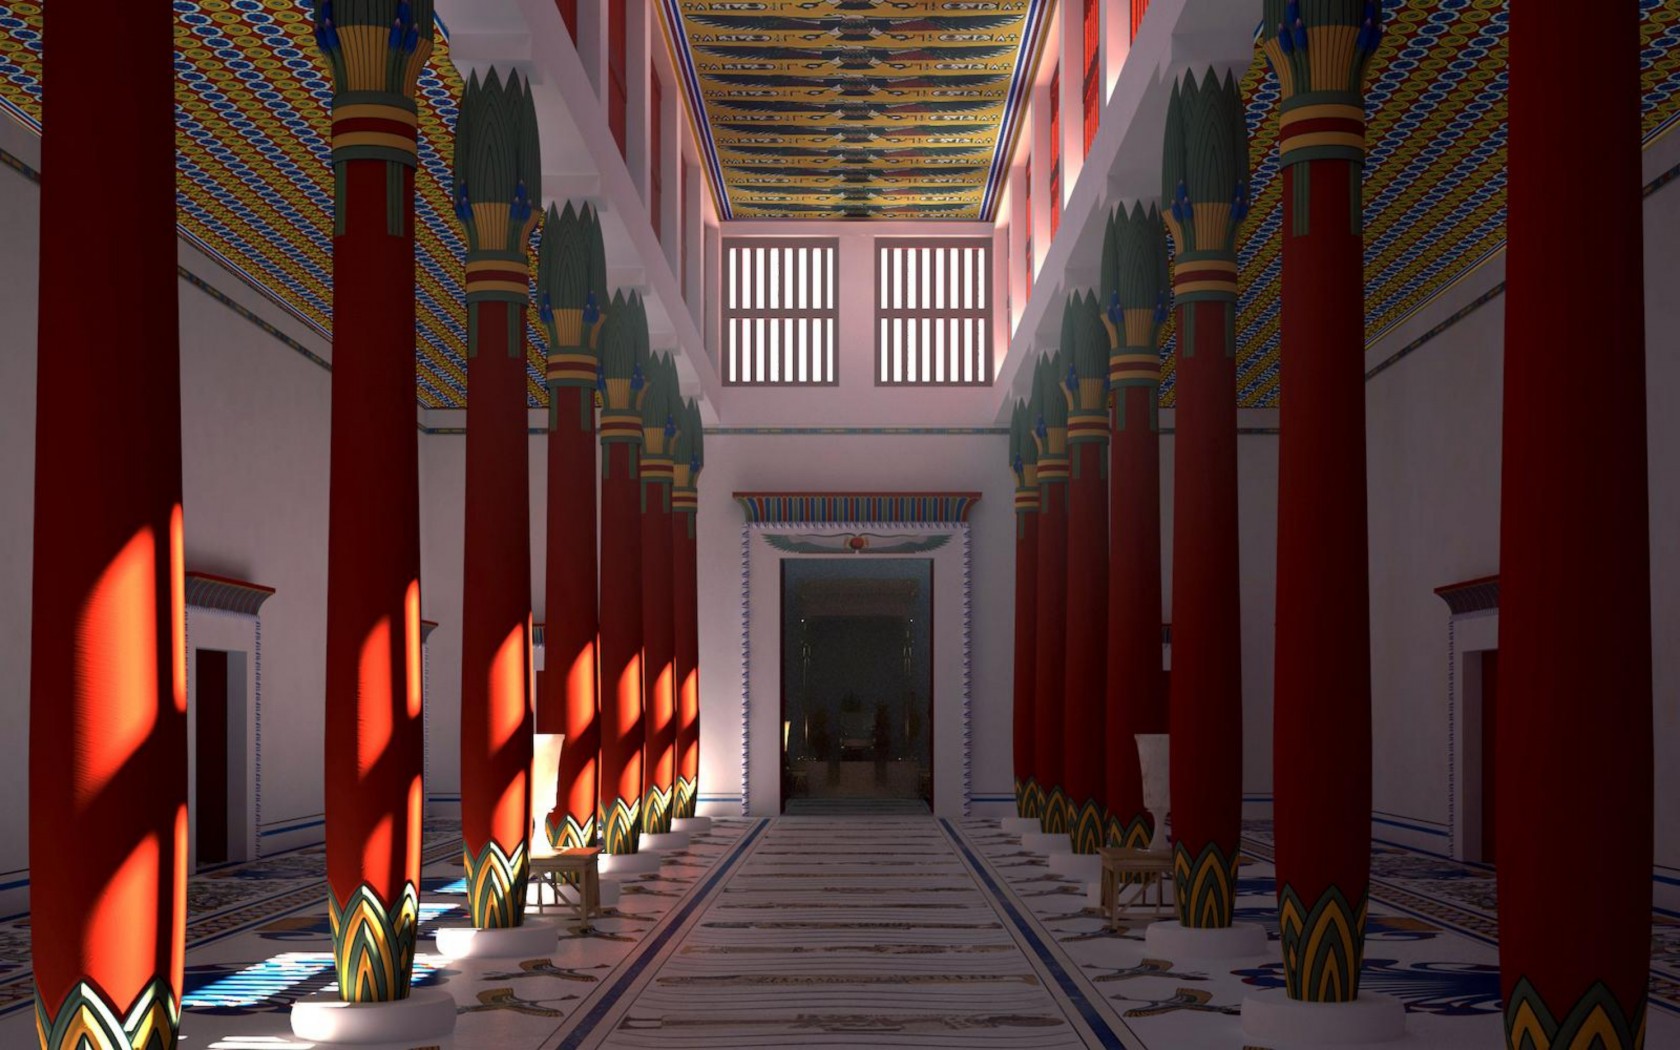 Reconstitution of the columned hall leading to the throne room of the palace of Malqata